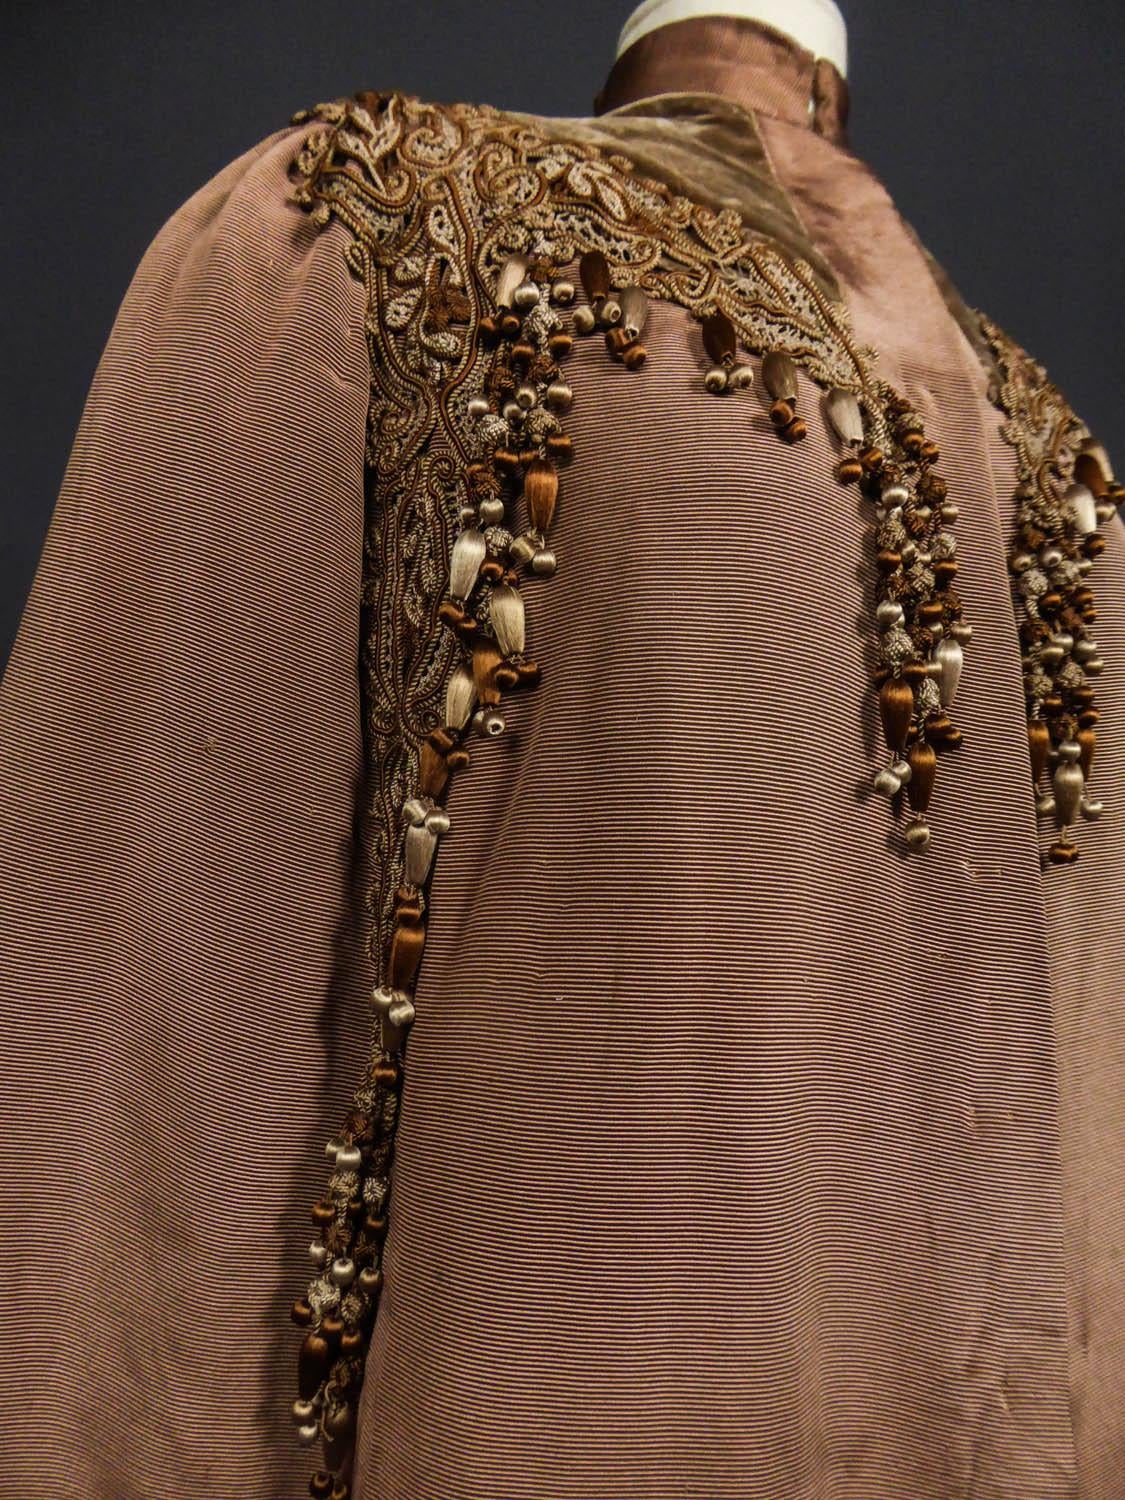 Circa 1890 - 1905
France

Large evening Cape in chestnut silk ottoman embroidered with trimmings dating from the late nineteenth century in the style of the french designer Emile Pingat. Cut to the shape of the shoulders, small raised collar, this